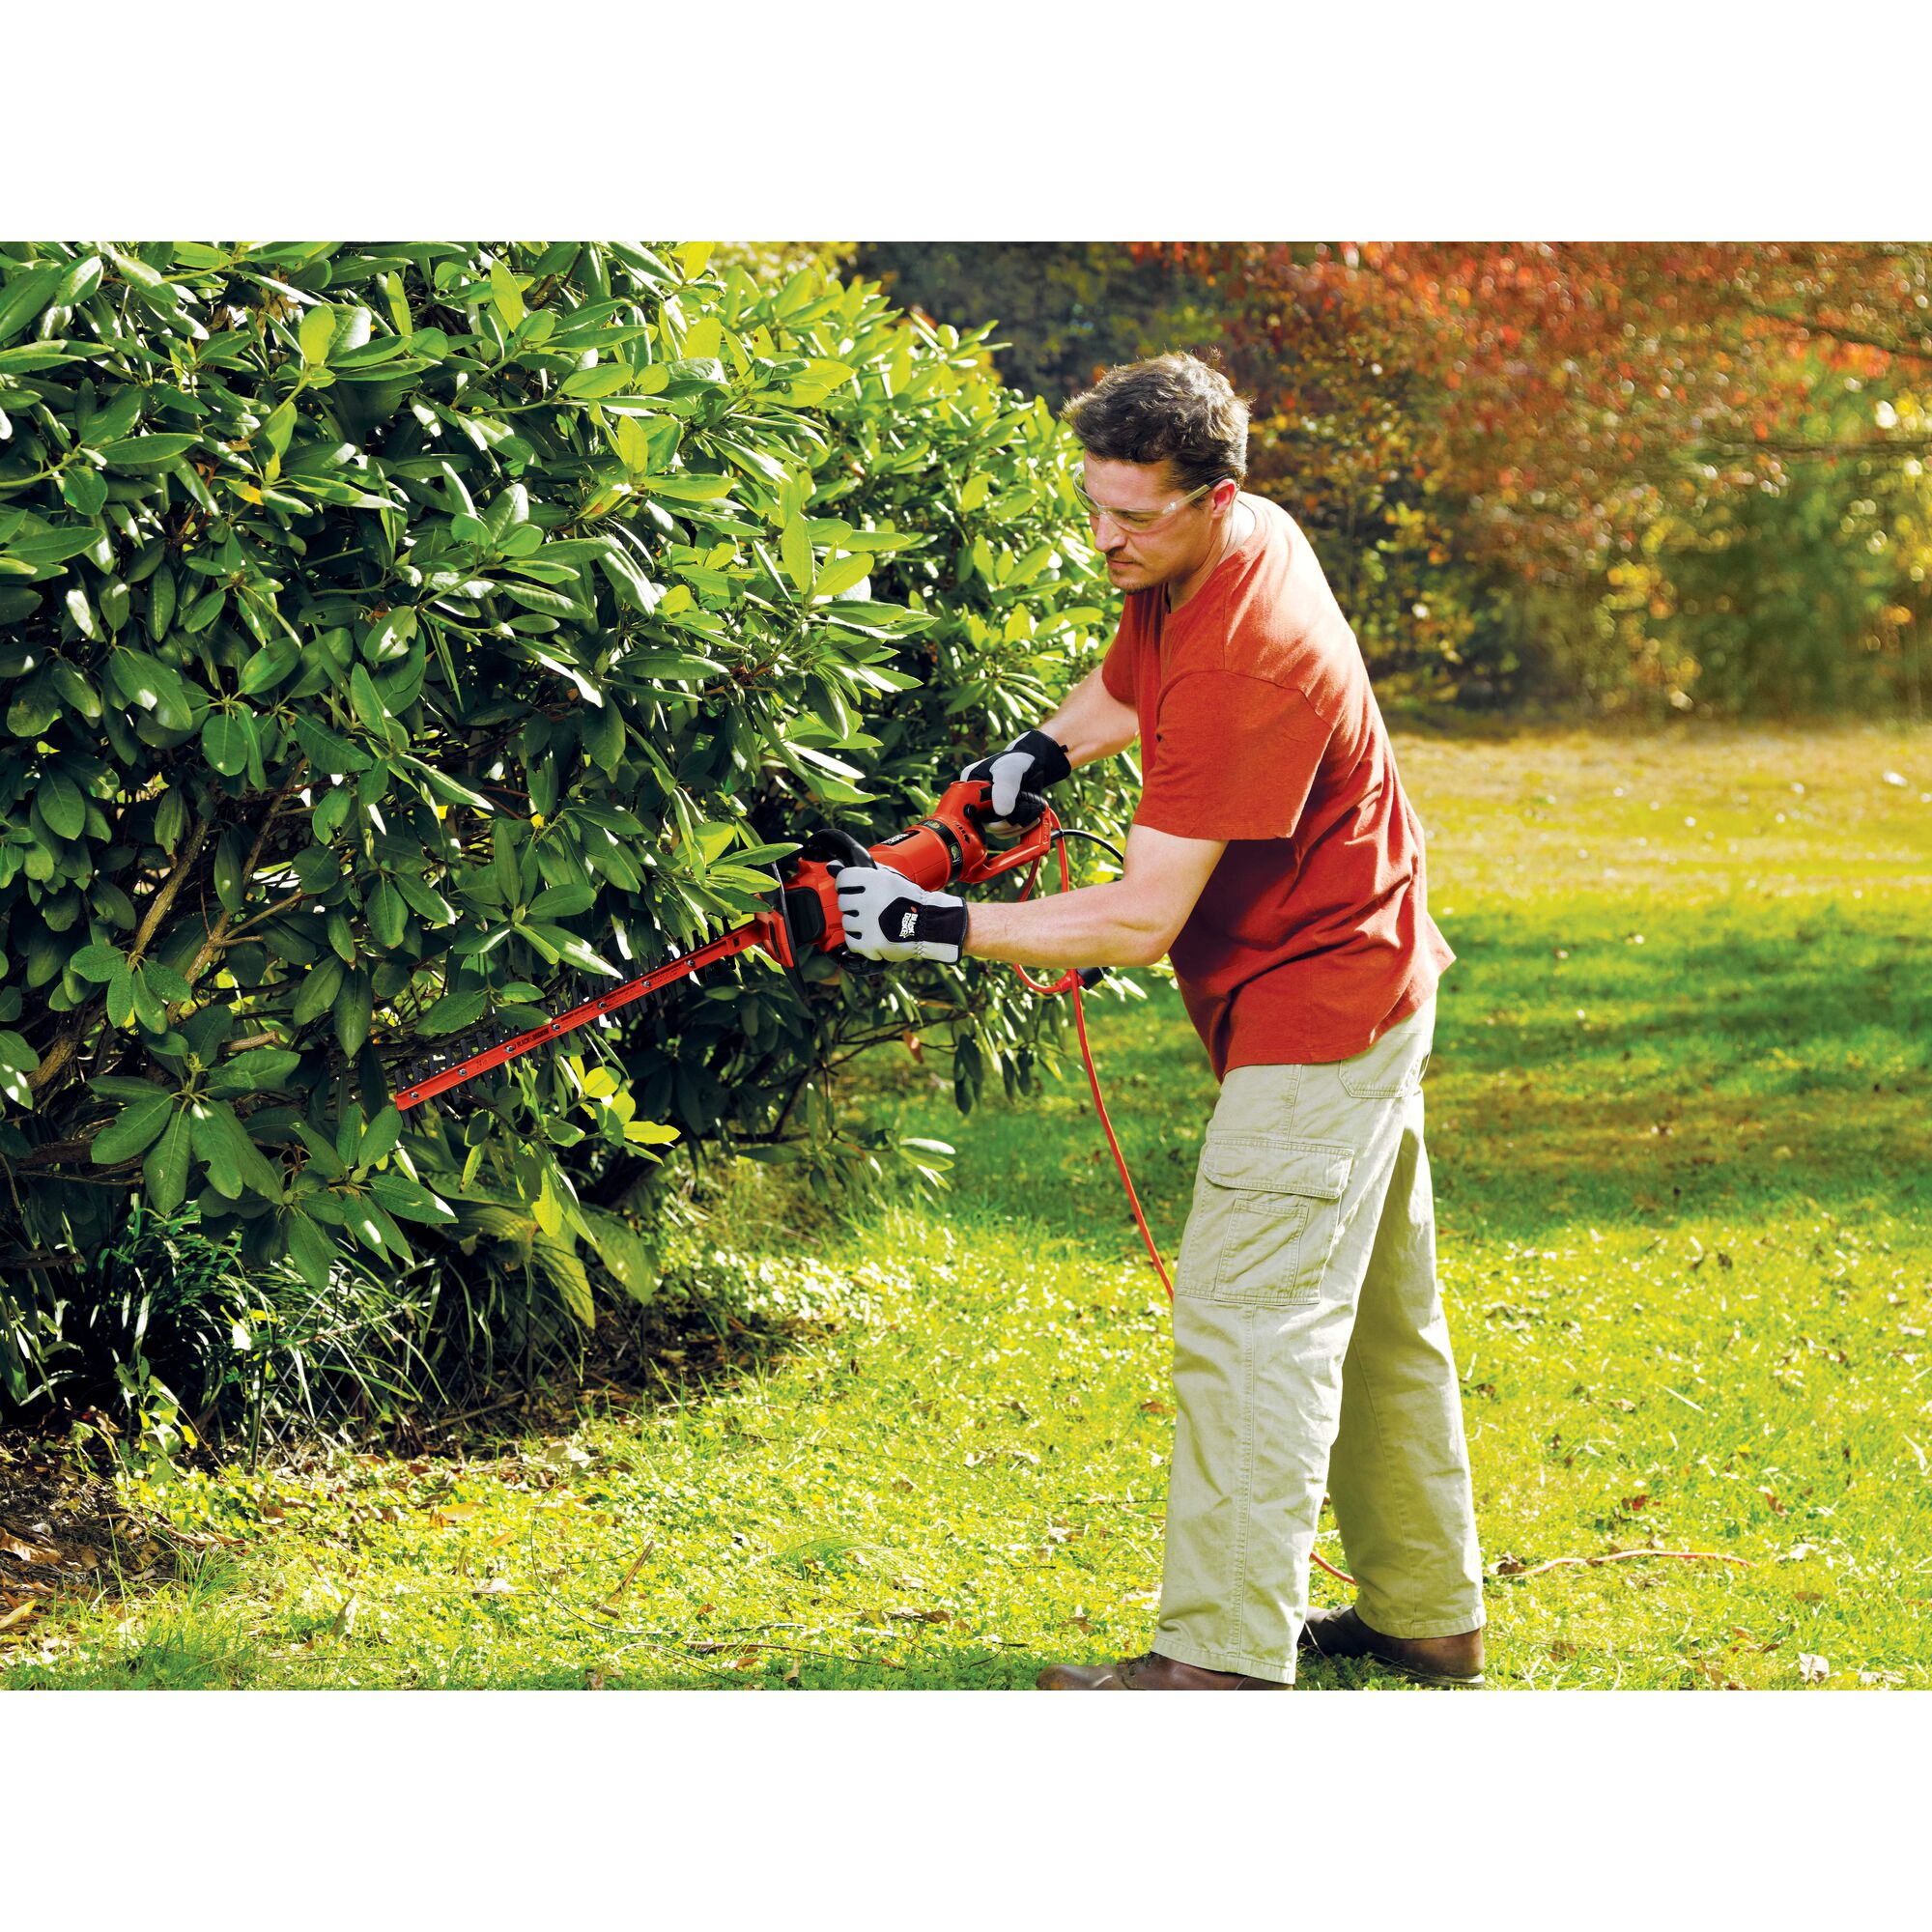 Hedge trimmer with rotating handle being used by a person to trim bushes.